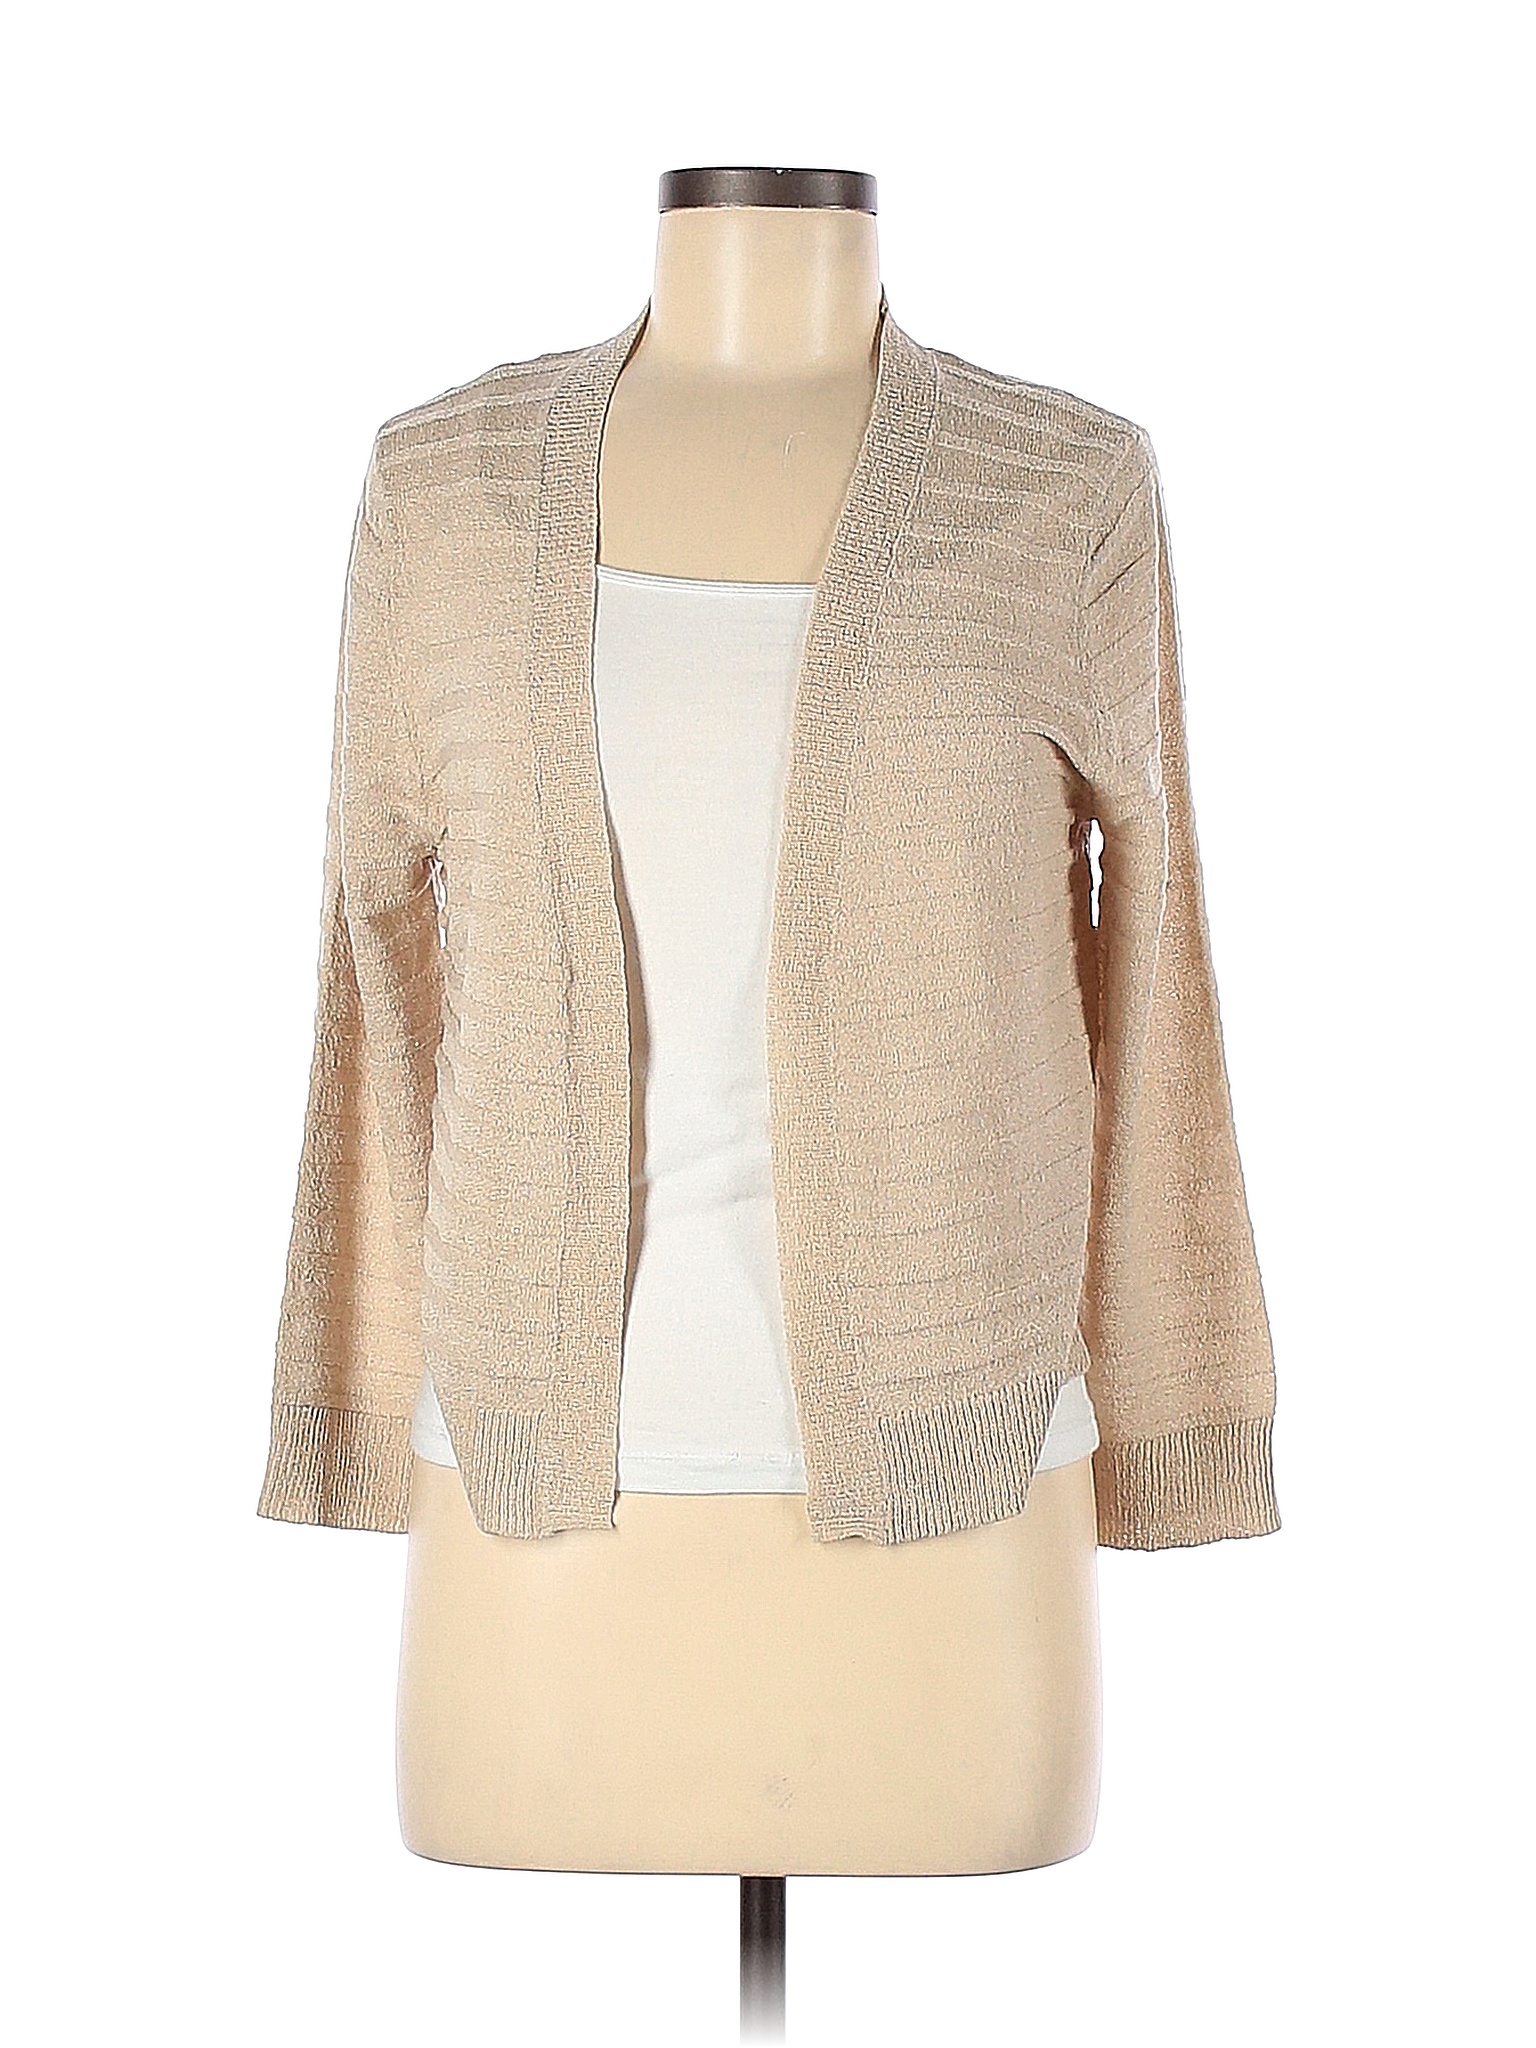 Cable & Gauge Solid Tan Cardigan Size M - 80% off | thredUP